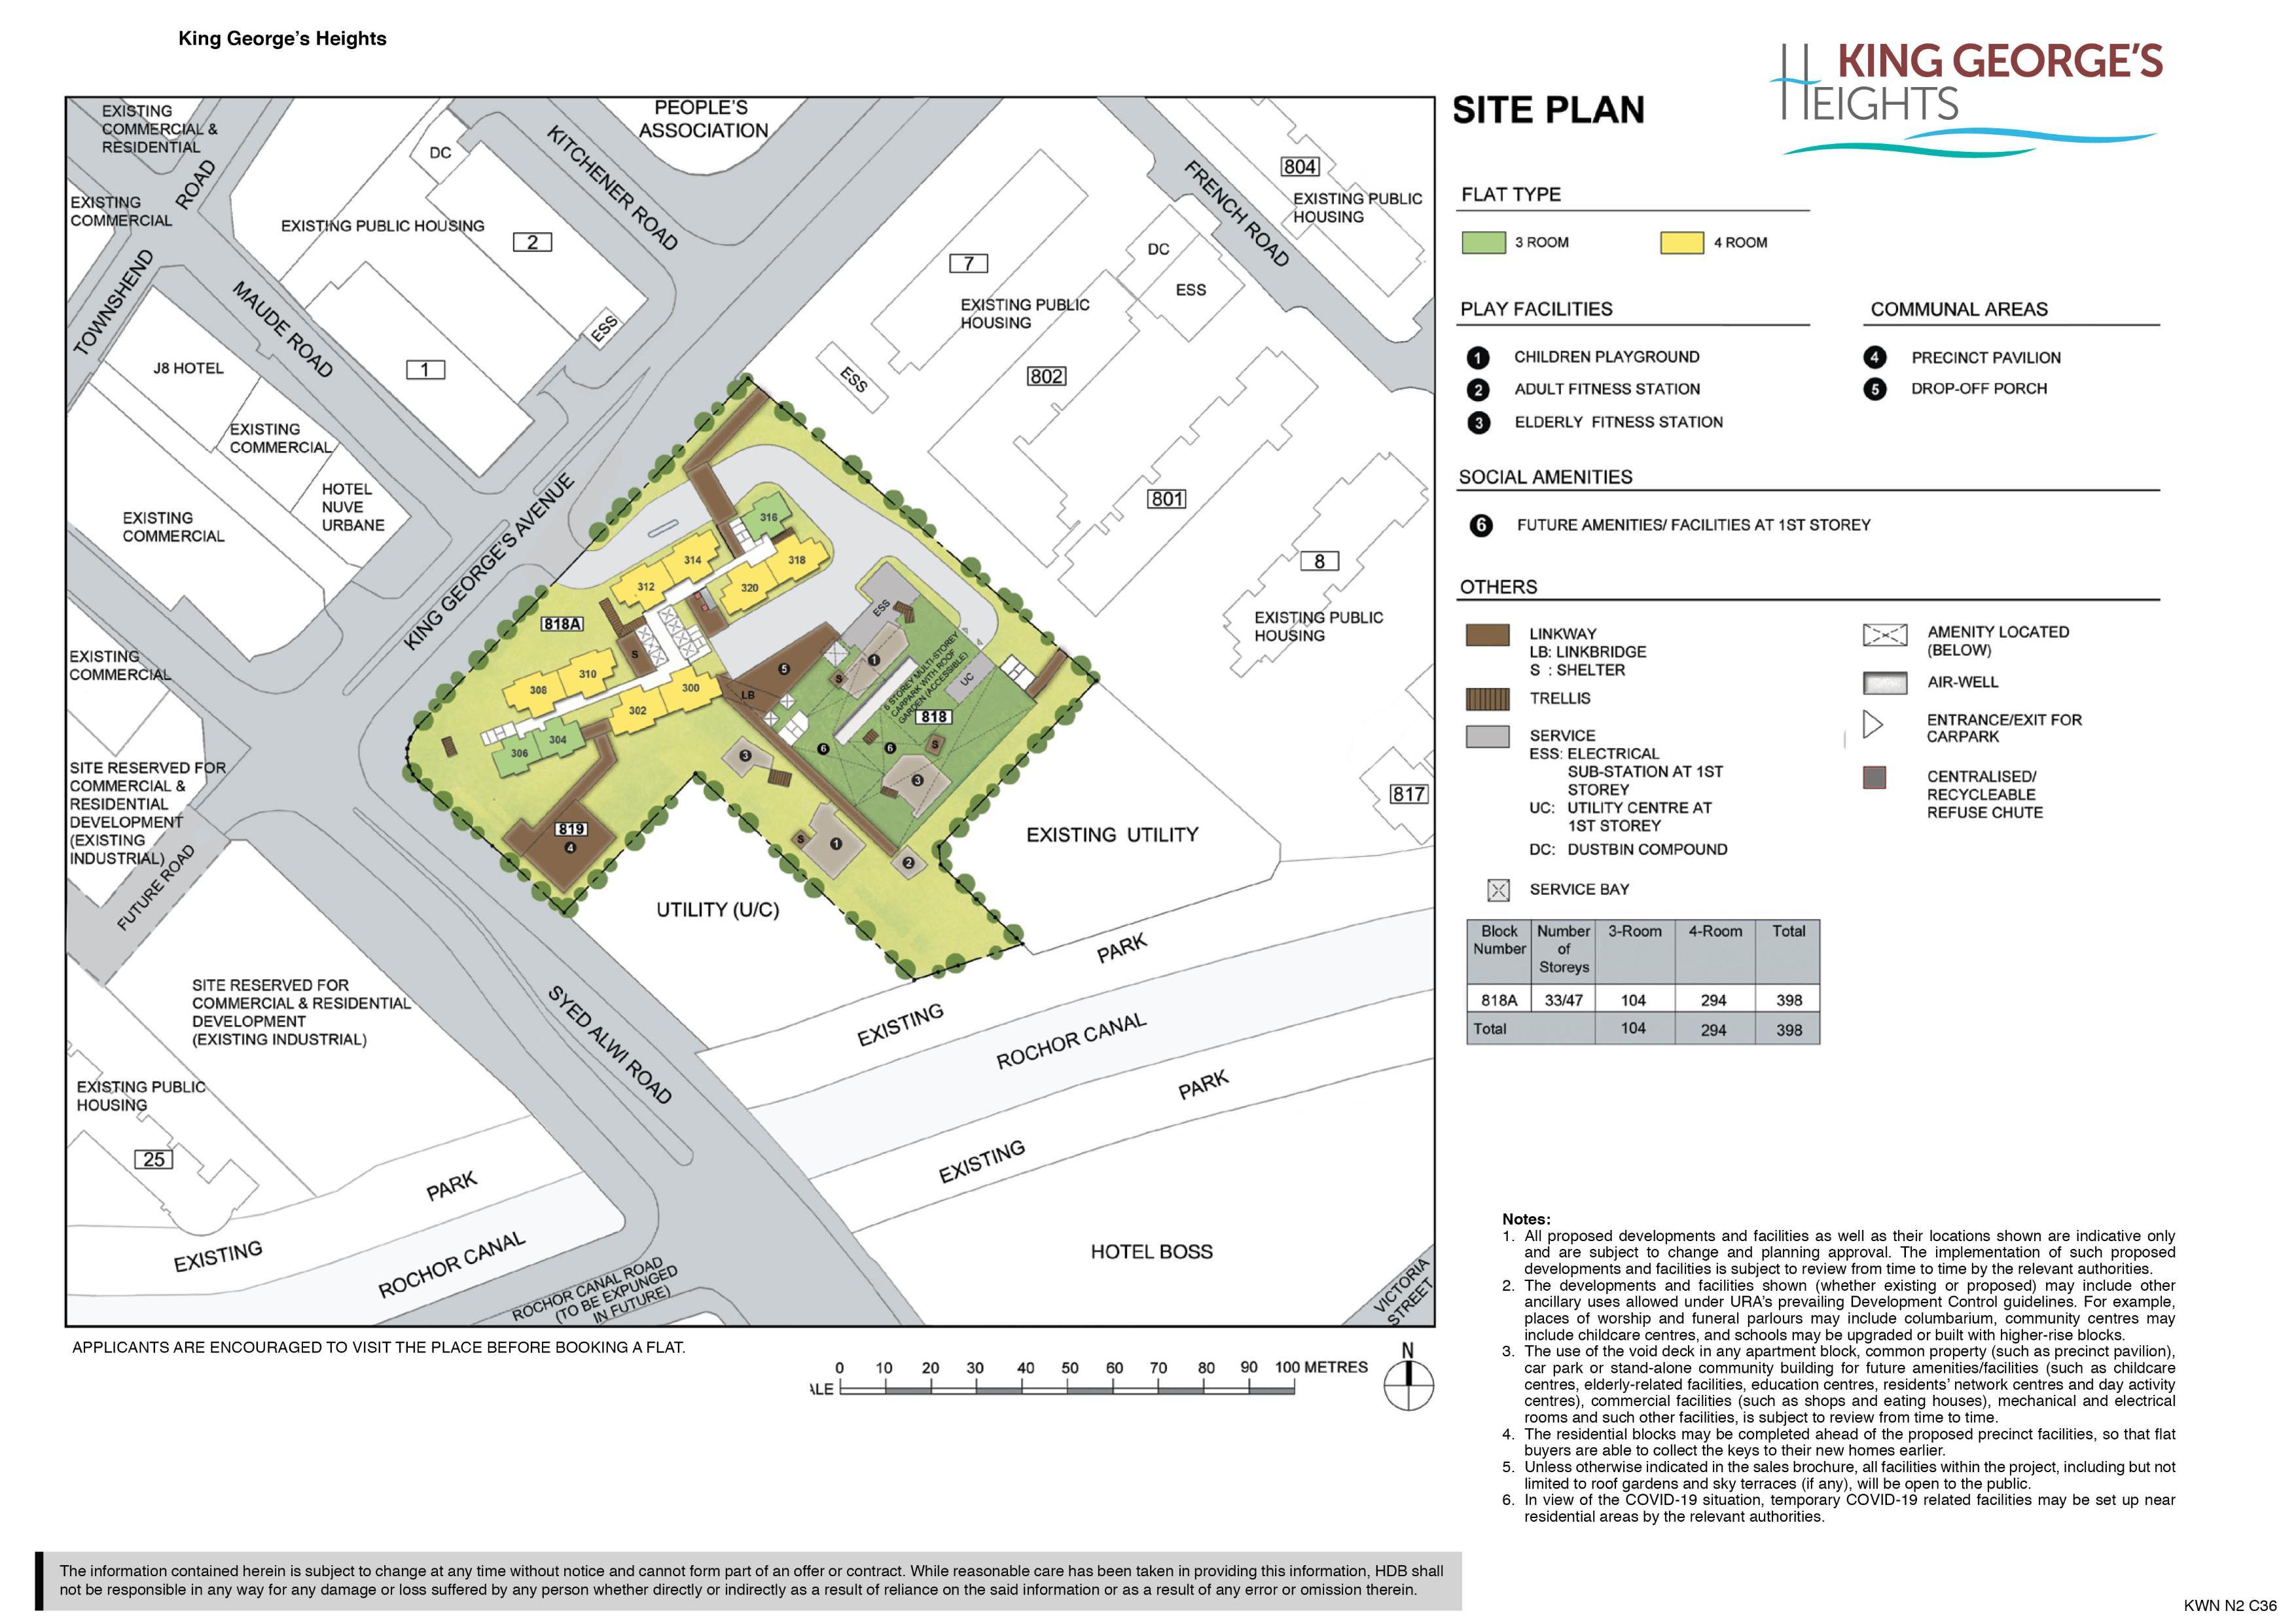 King George’s Heights Site Plan